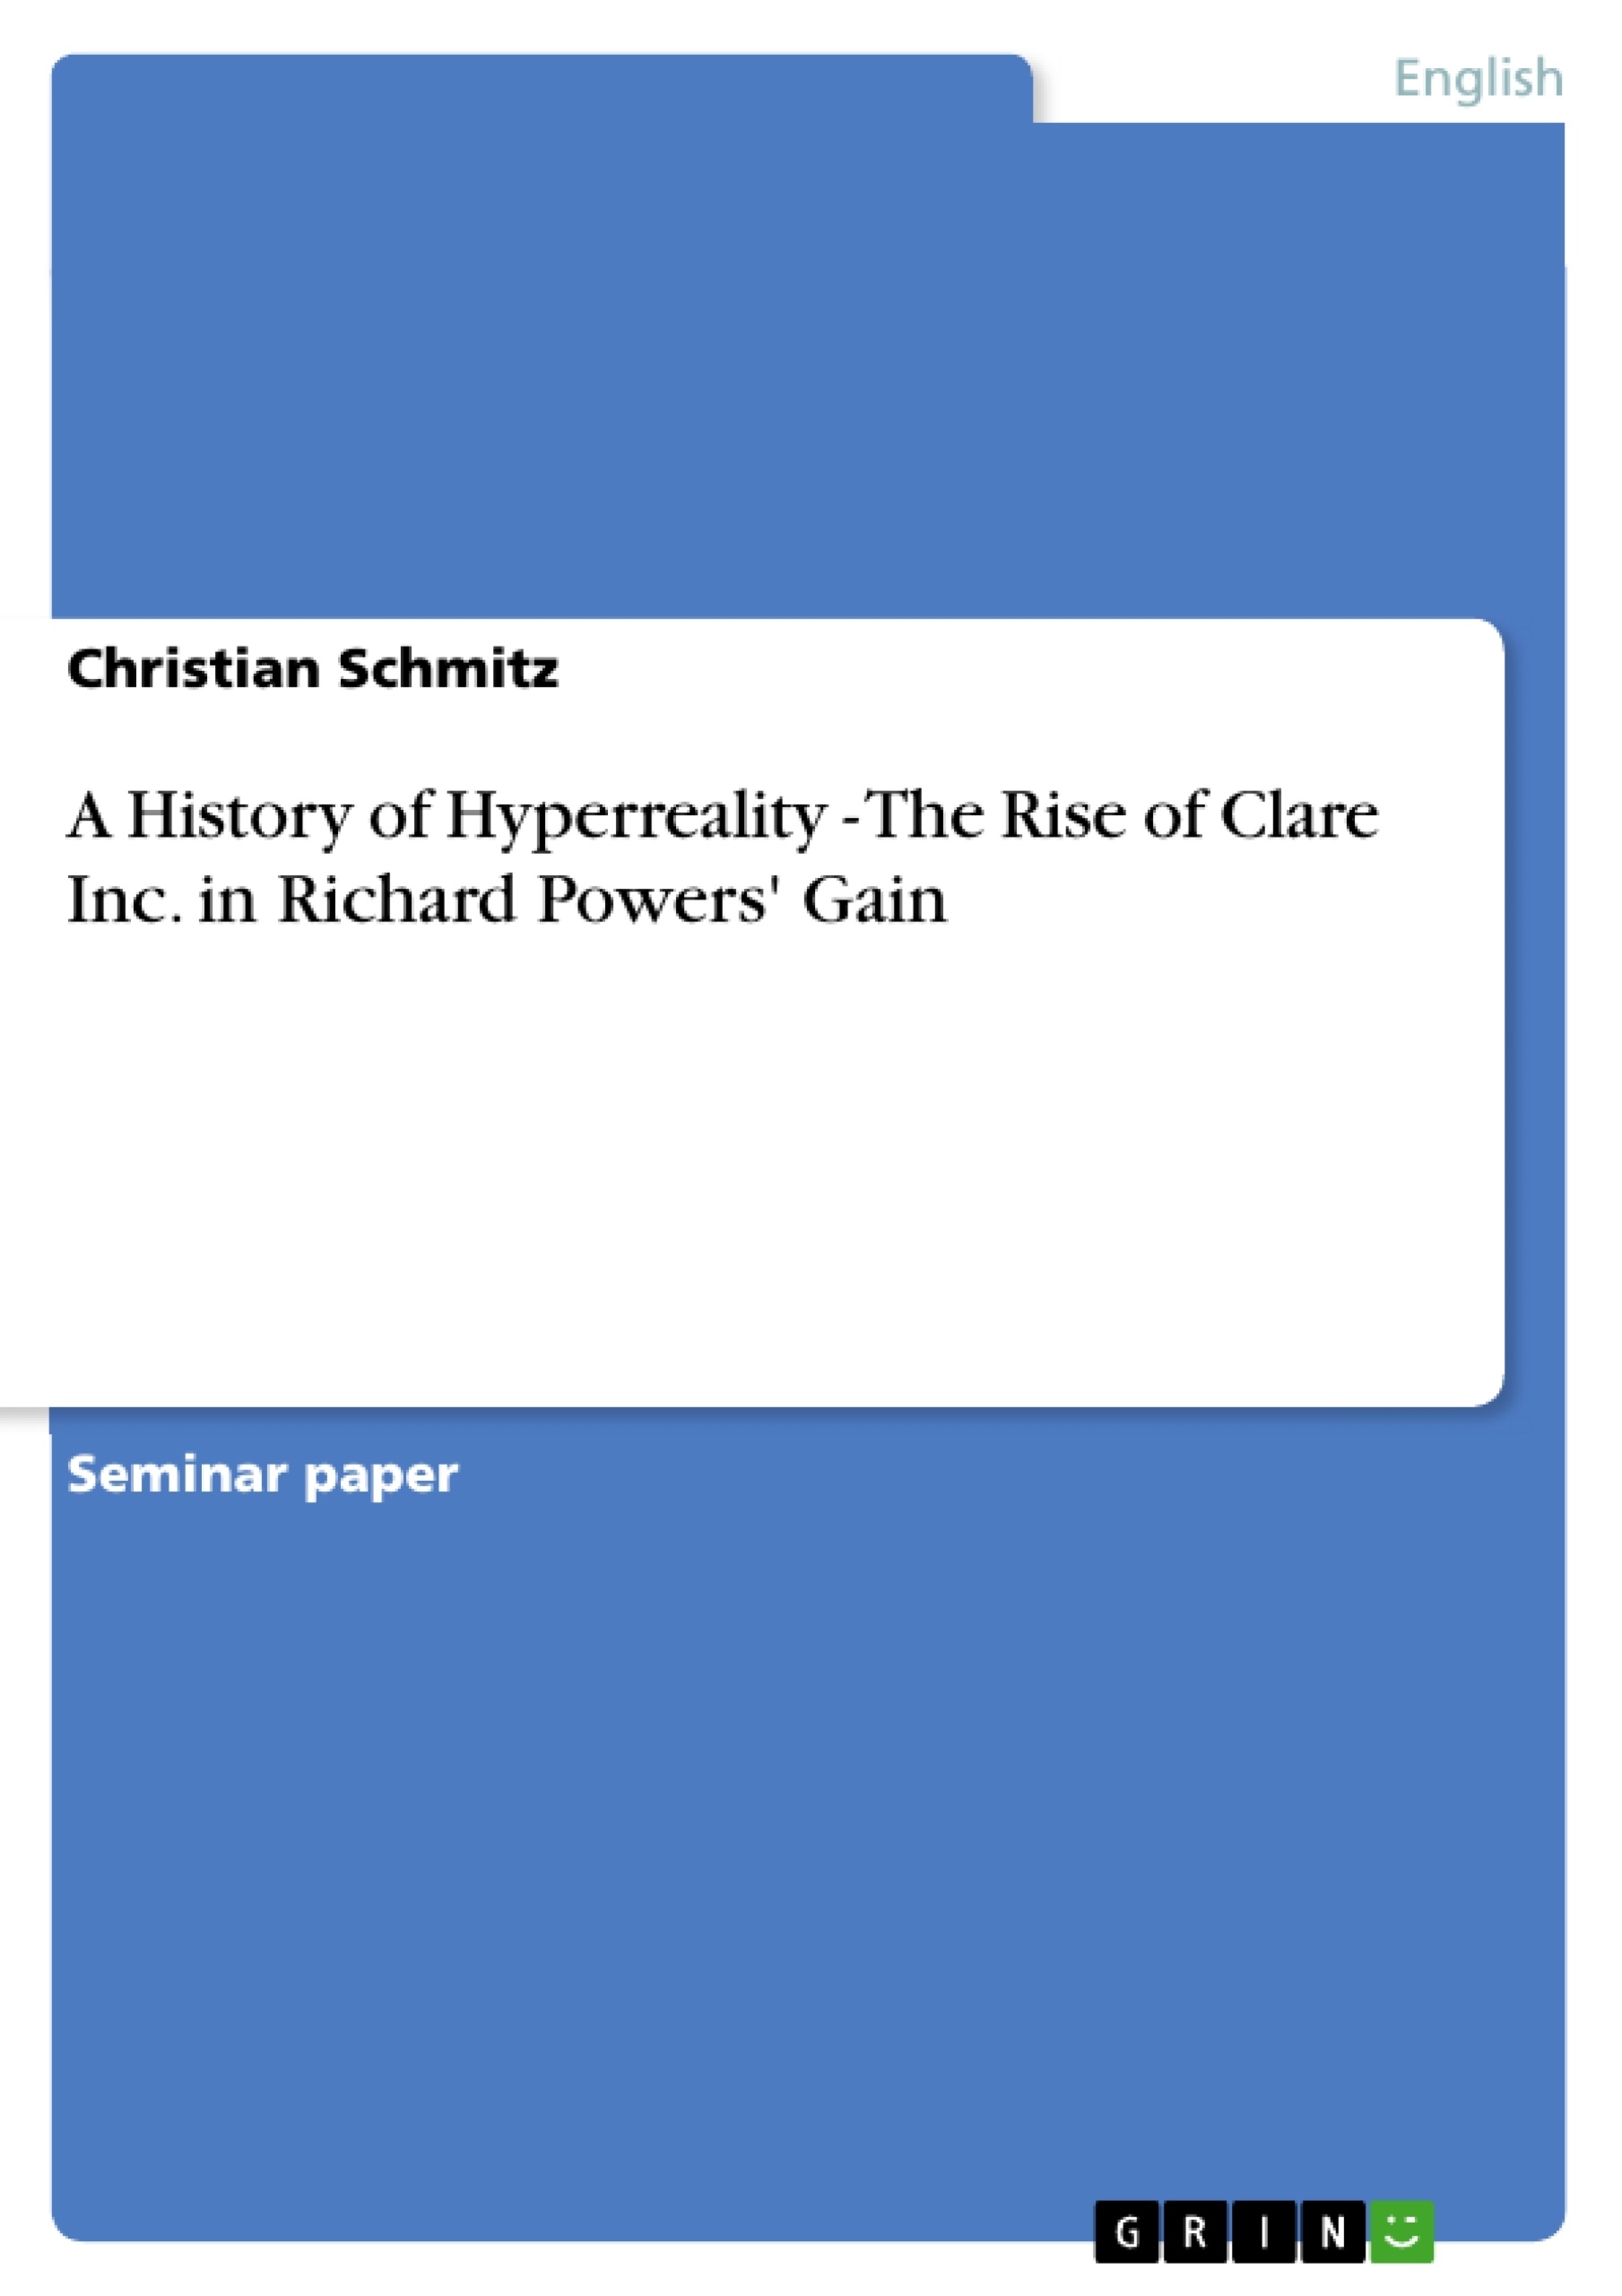 Título: A History of Hyperreality - The Rise of Clare Inc. in Richard Powers' Gain